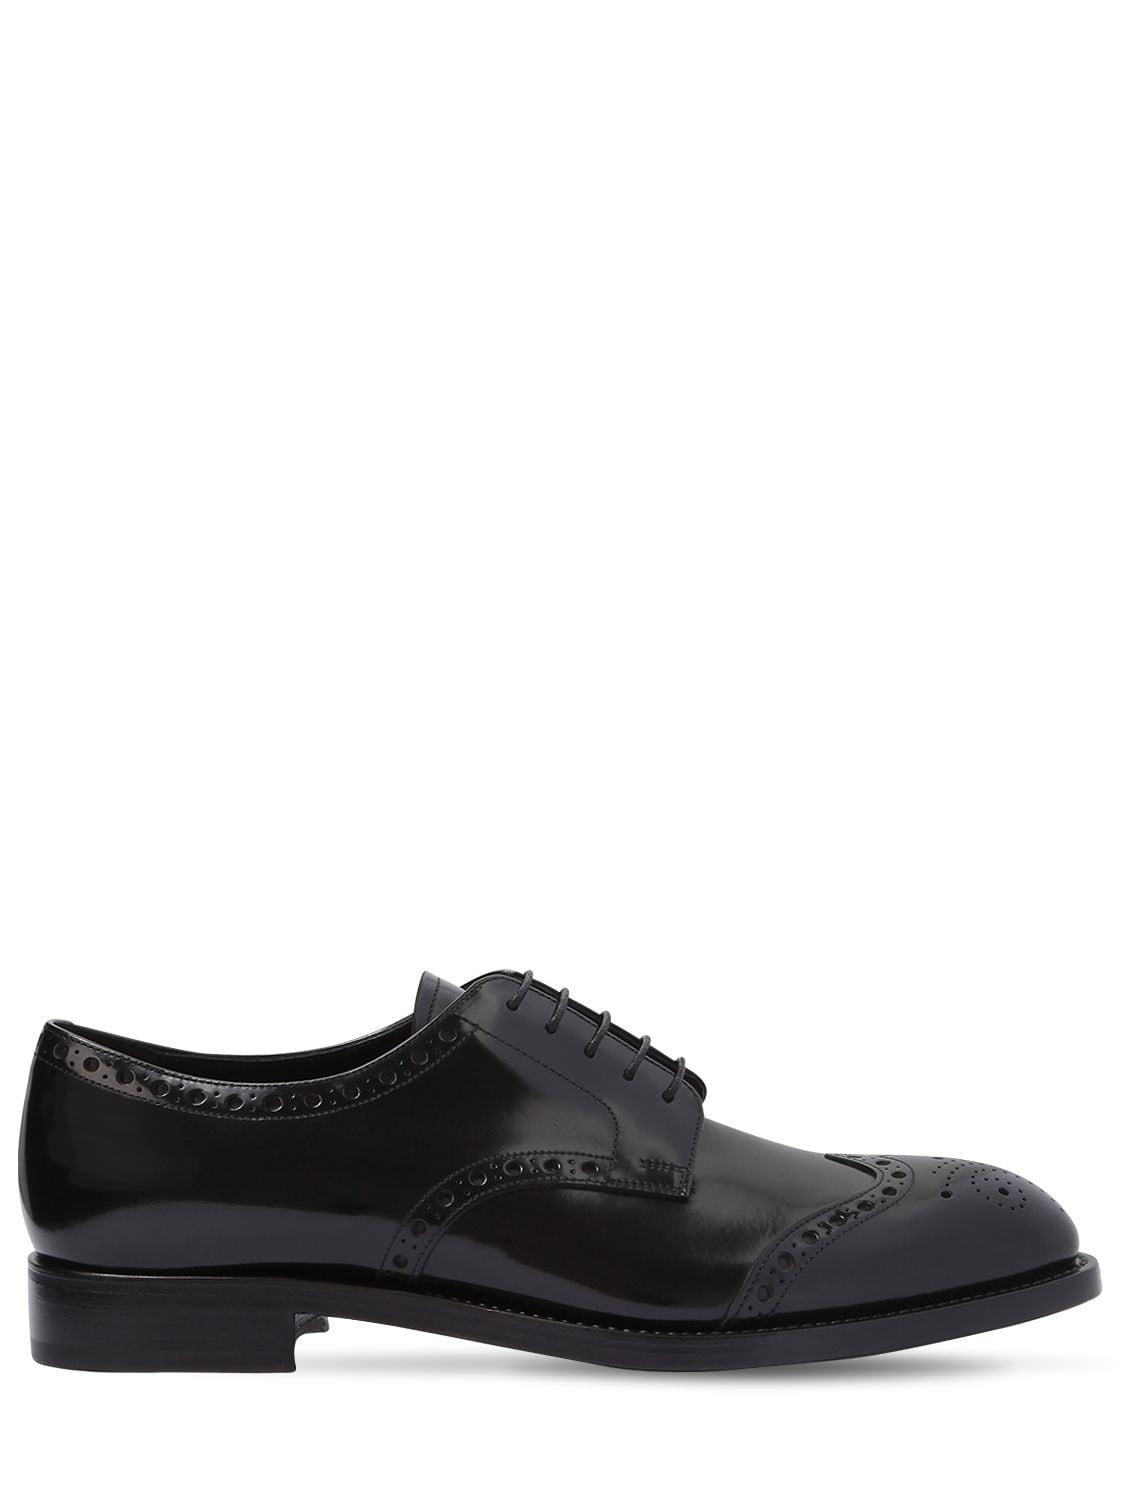 Prada Brogue Brushed Leather Derby Shoes In Black